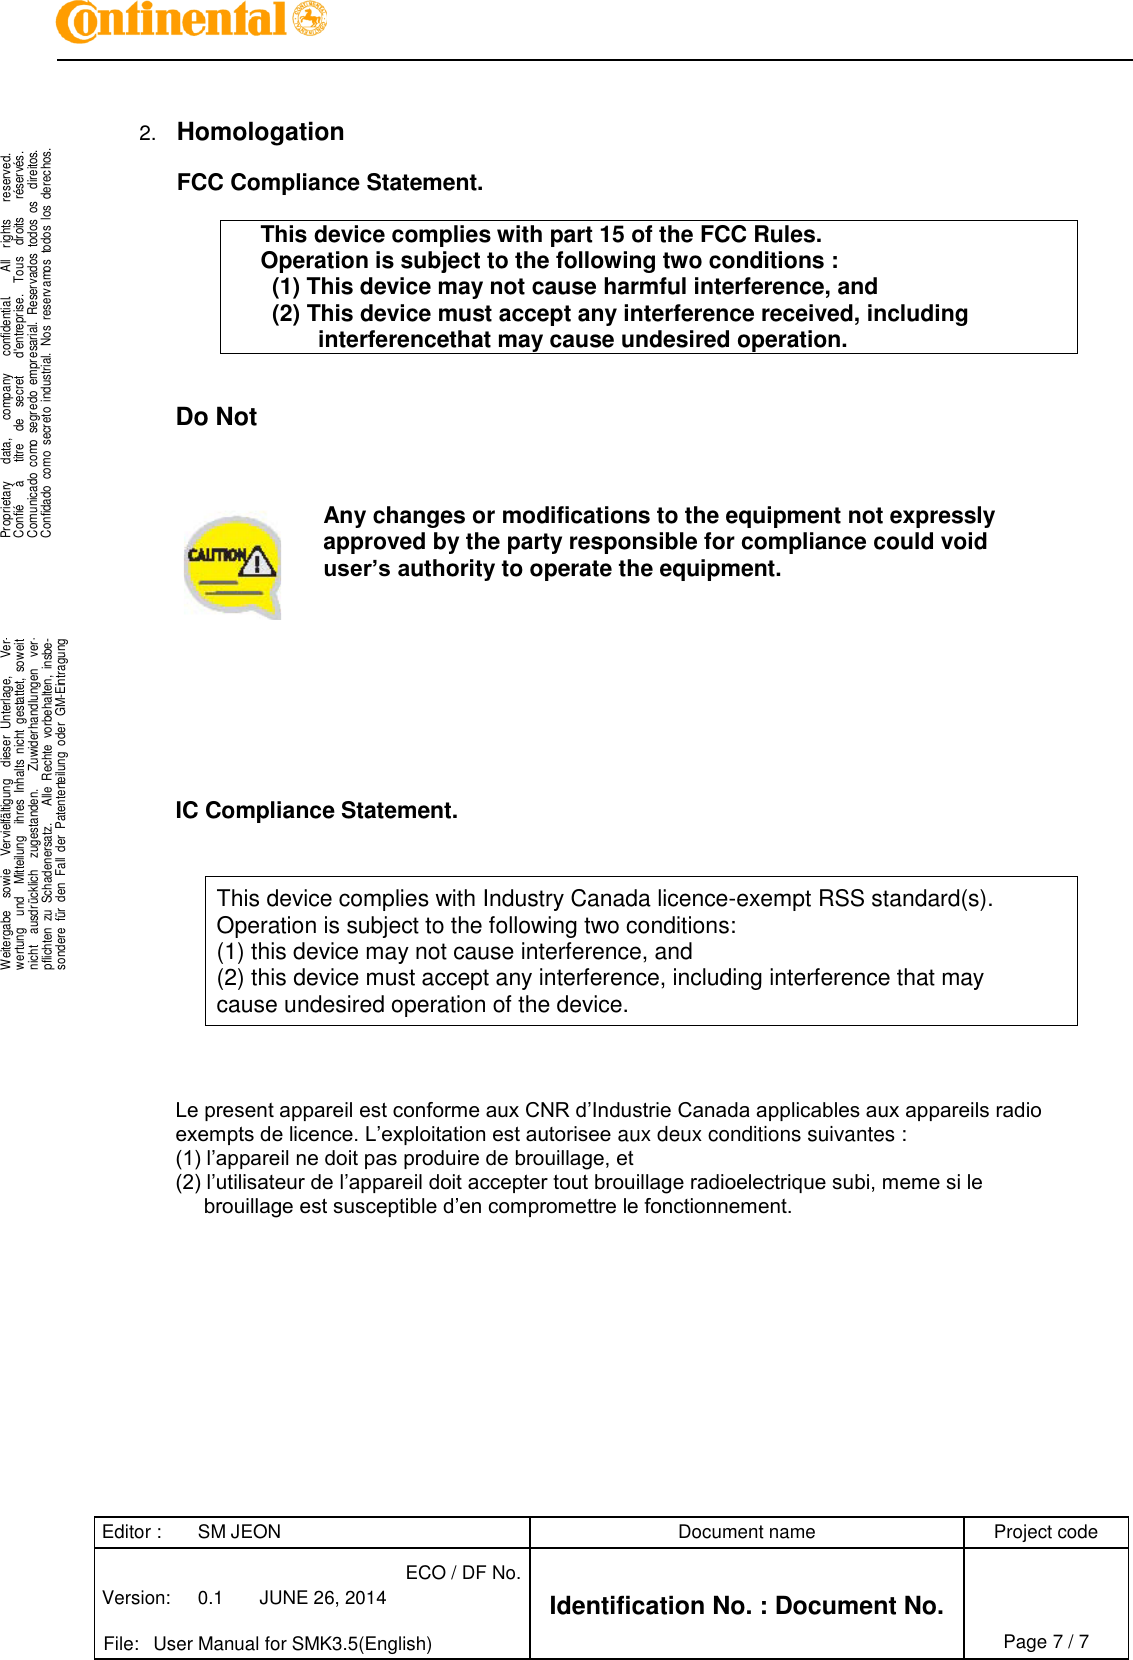 Editor : SM JEON Document name Project code Version: 0.1 JUNE 26, 2014 ECO / DF No. Identification No. : Document No.   File: User Manual for SMK3.5(English) Page 7 / 7     .Proprietary     data,      company      confidential.       All    rights      reserved.Confié      à      titre    de    secret      d&apos;entreprise.    Tous    droits      réservés.Comunicado  como  segredo  empresarial.  Reservados  todos  os    direitos.Confidado  como  secreto  industrial.  Nos  reservamos  todos  los  derechos. . .Weitergabe    sowie    Vervielfältigung    dieser  Unterlage,      Ver-wertung    und    Mitteilung    ihres  Inhalts  nicht  gestattet,  soweitnicht    ausdrücklich    zugestanden.      Zuwiderhandlungen    ver-pflichten  zu  Schadenersatz.      Alle  Rechte  vorbehalten,  insbe-sondere  für  den  Fall  der  Patenterteilung  oder  GM-Eintragung..   2. Homologation  FCC Compliance Statement.  This device complies with part 15 of the FCC Rules. Operation is subject to the following two conditions : (1) This device may not cause harmful interference, and (2) This device must accept any interference received, including interferencethat may cause undesired operation.    Do Not          Any changes or modifications to the equipment not expressly approved by the party responsible for compliance could void user’s authority to operate the equipment.           IC Compliance Statement.   This device complies with Industry Canada licence-exempt RSS standard(s). Operation is subject to the following two conditions: (1) this device may not cause interference, and (2) this device must accept any interference, including interference that may cause undesired operation of the device.     Le present appareil est conforme aux CNR d’Industrie Canada applicables aux appareils radio exempts de licence. L’exploitation est autorisee aux deux conditions suivantes : (1) l’appareil ne doit pas produire de brouillage, et (2) l’utilisateur de l’appareil doit accepter tout brouillage radioelectrique subi, meme si le  brouillage est susceptible d’en compromettre le fonctionnement. 